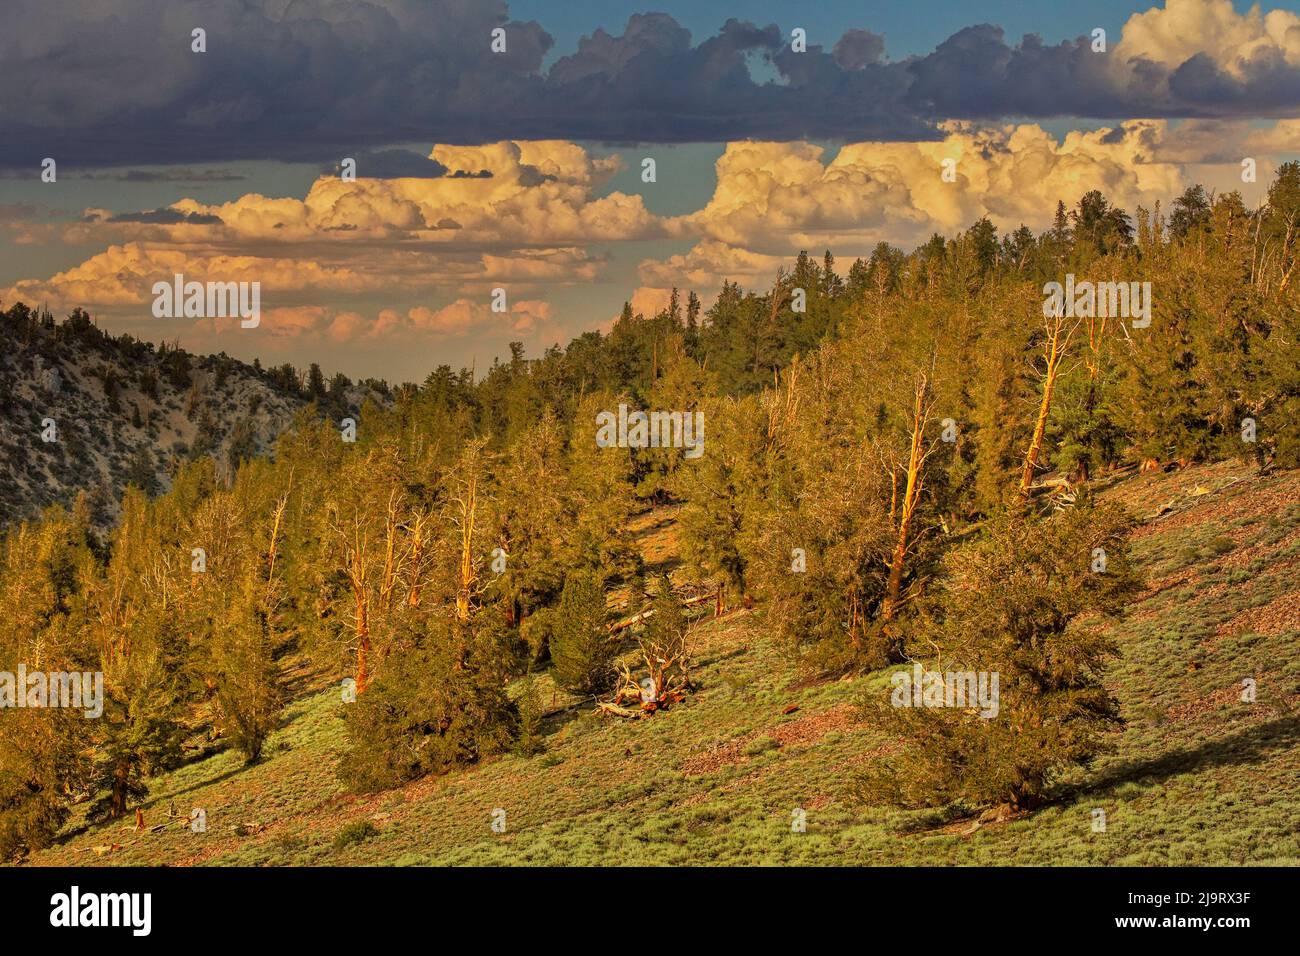 Bristlecone pine forest at sunset, White Mountains, Inyo National Forest, California Stock Photo